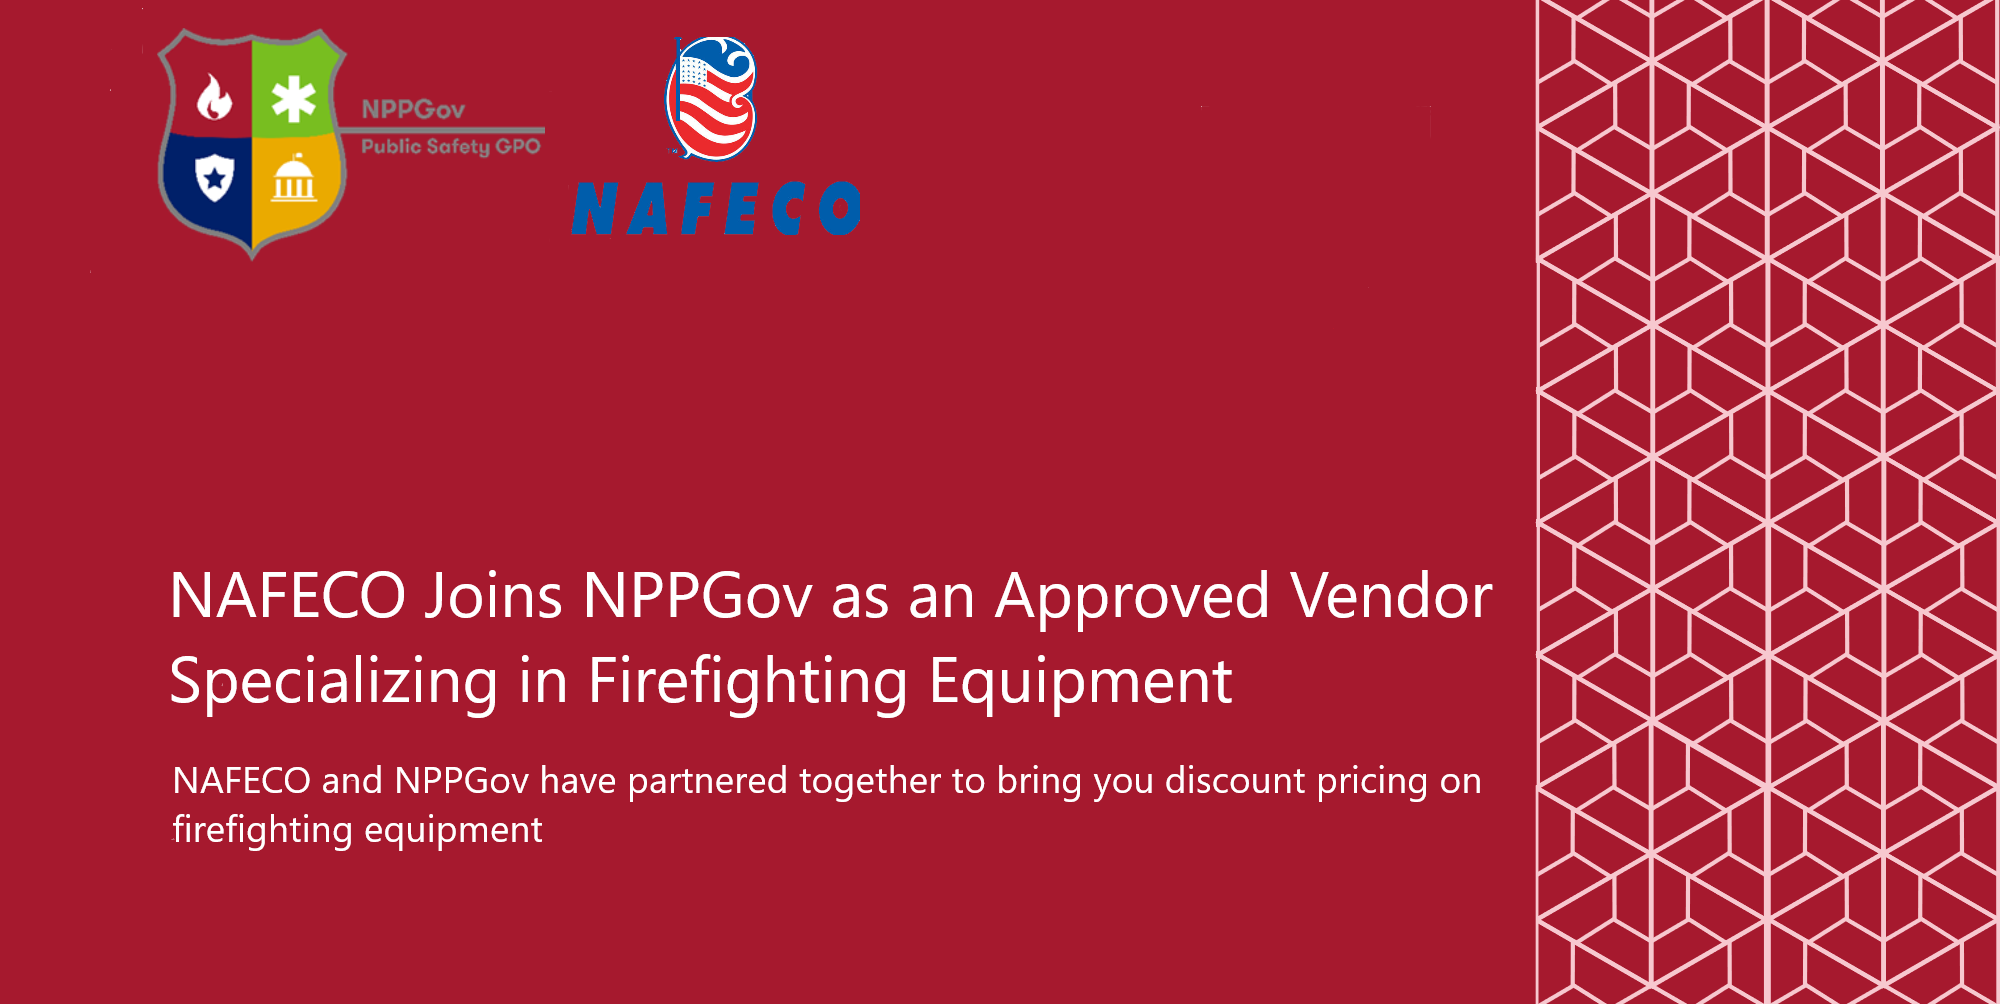 NAFECO Joins NPPGov as an Approved Vendor Specializing in Firefighter Equipment